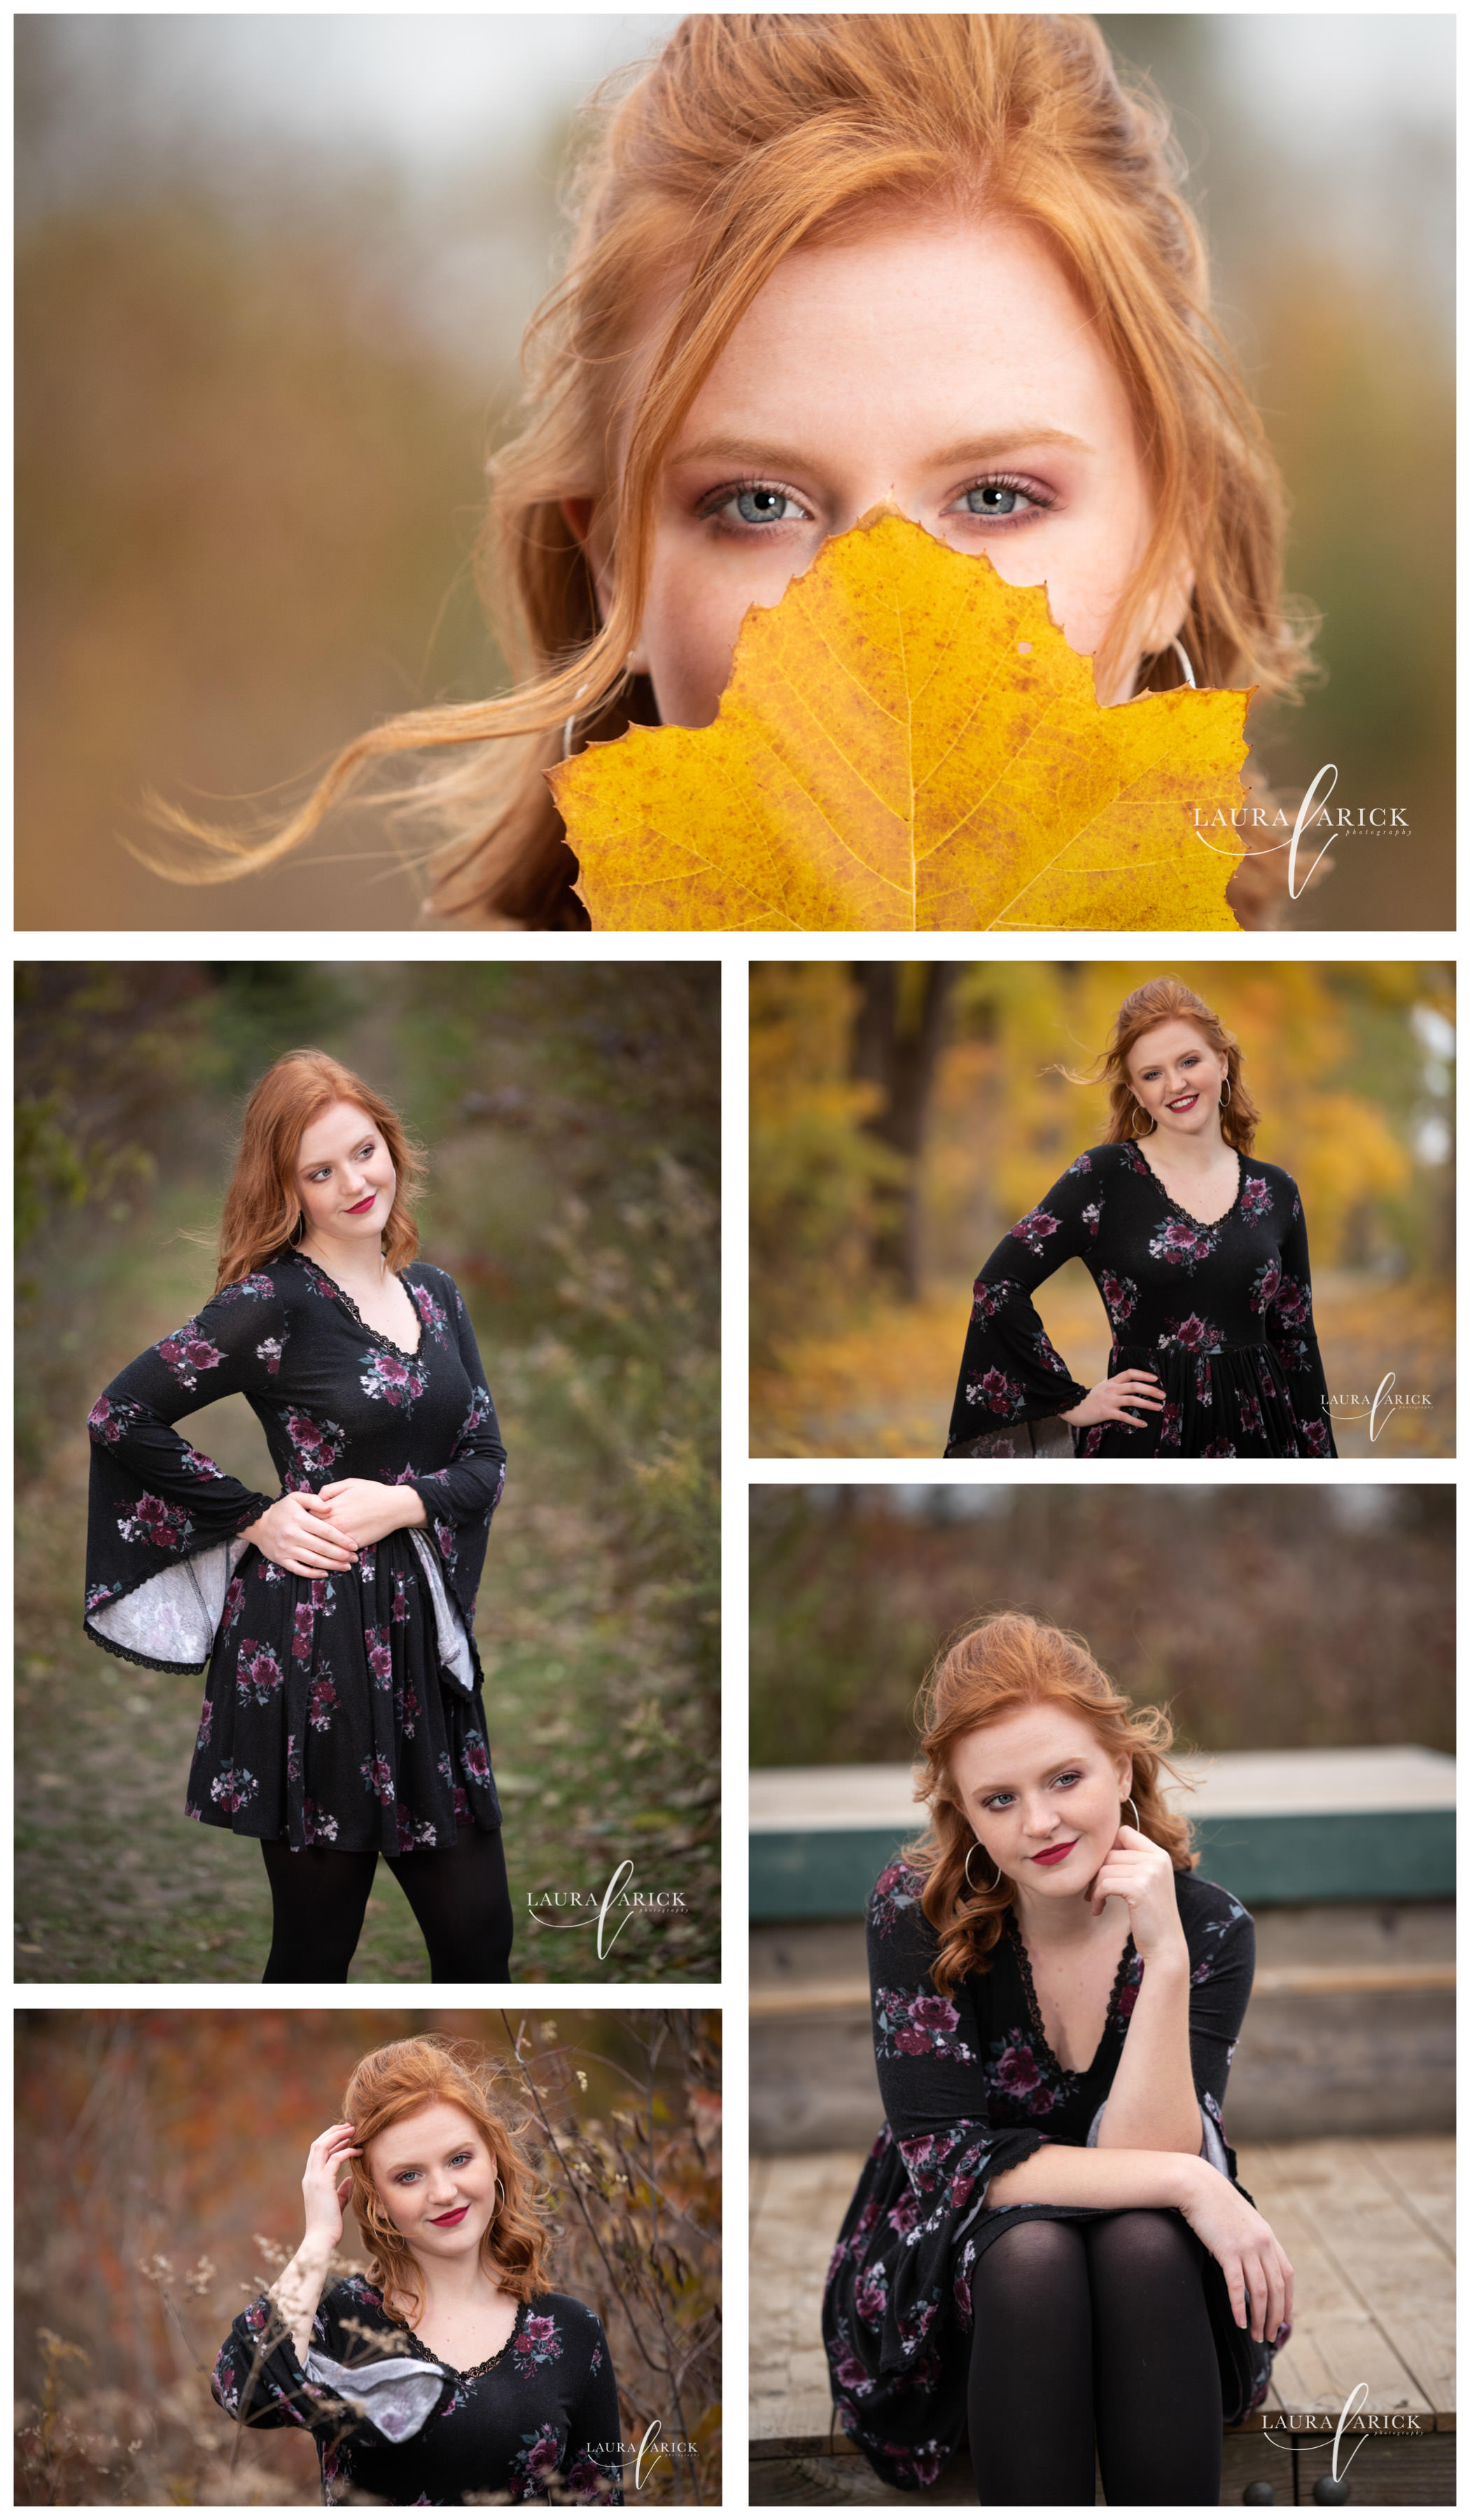 Fall Senior Pictures Class Of 2019 Sam Laura Arick Photography